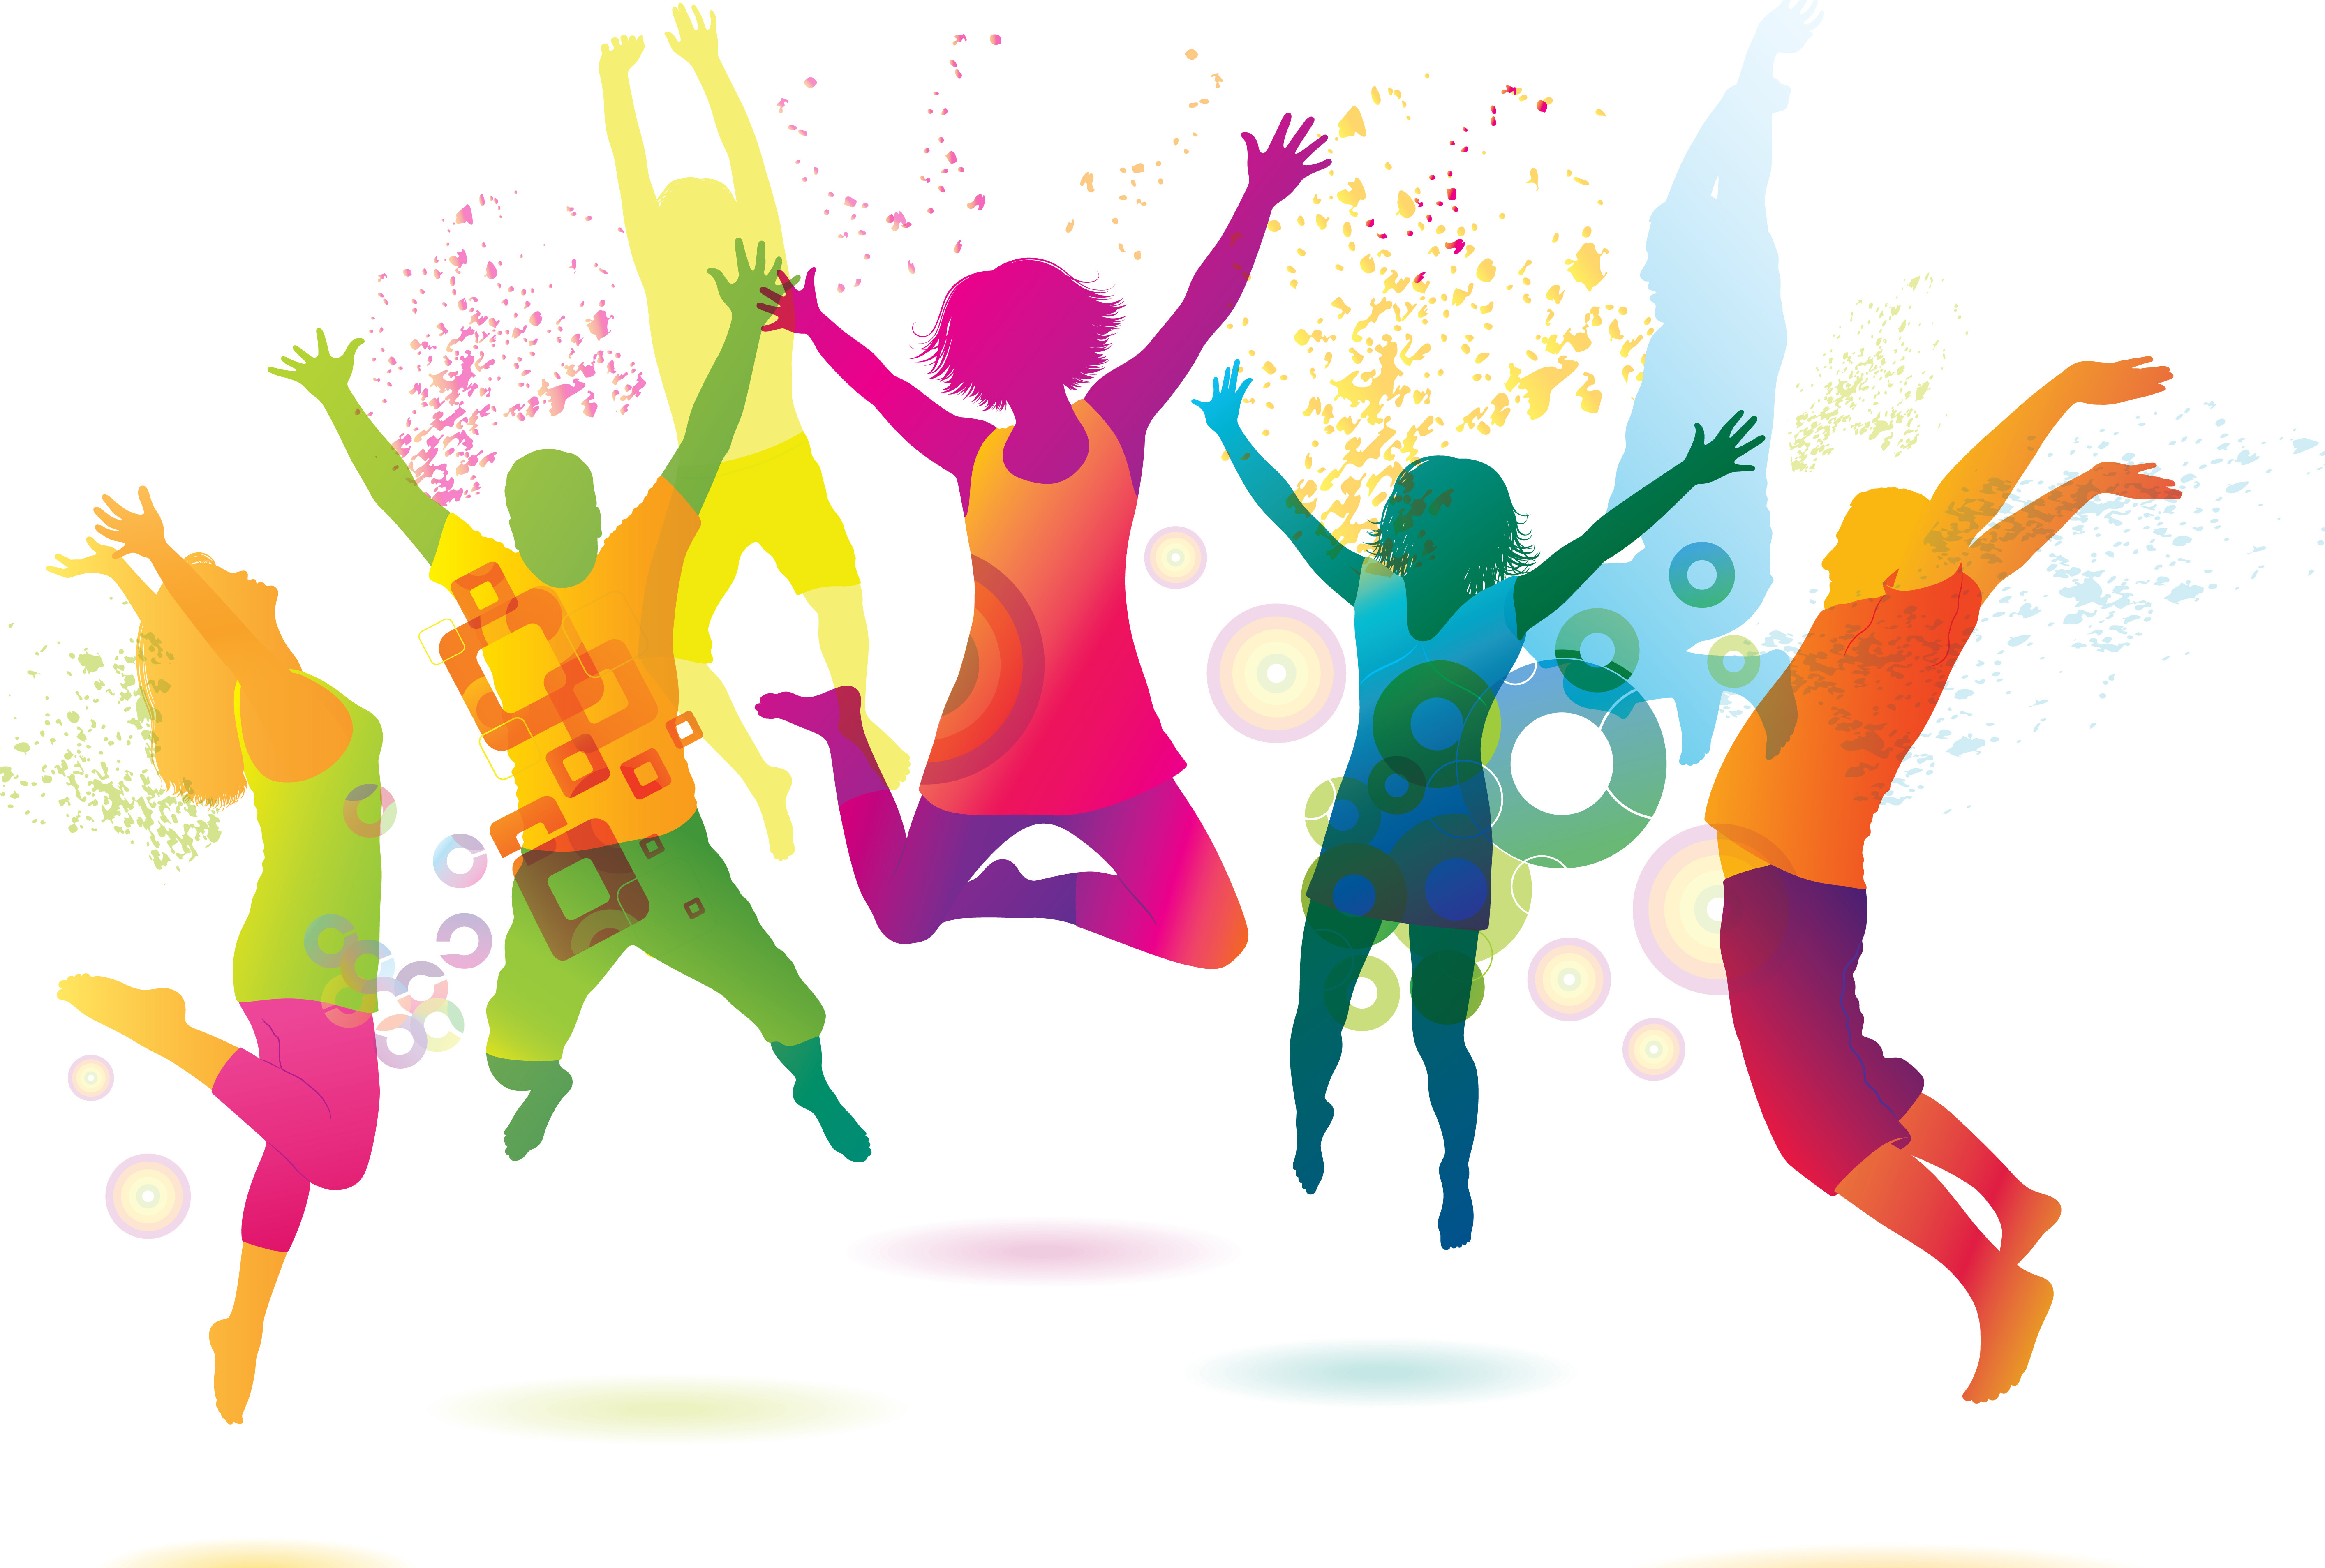 5 persons jumping for joy in a colorful outline with circles and paint splatter